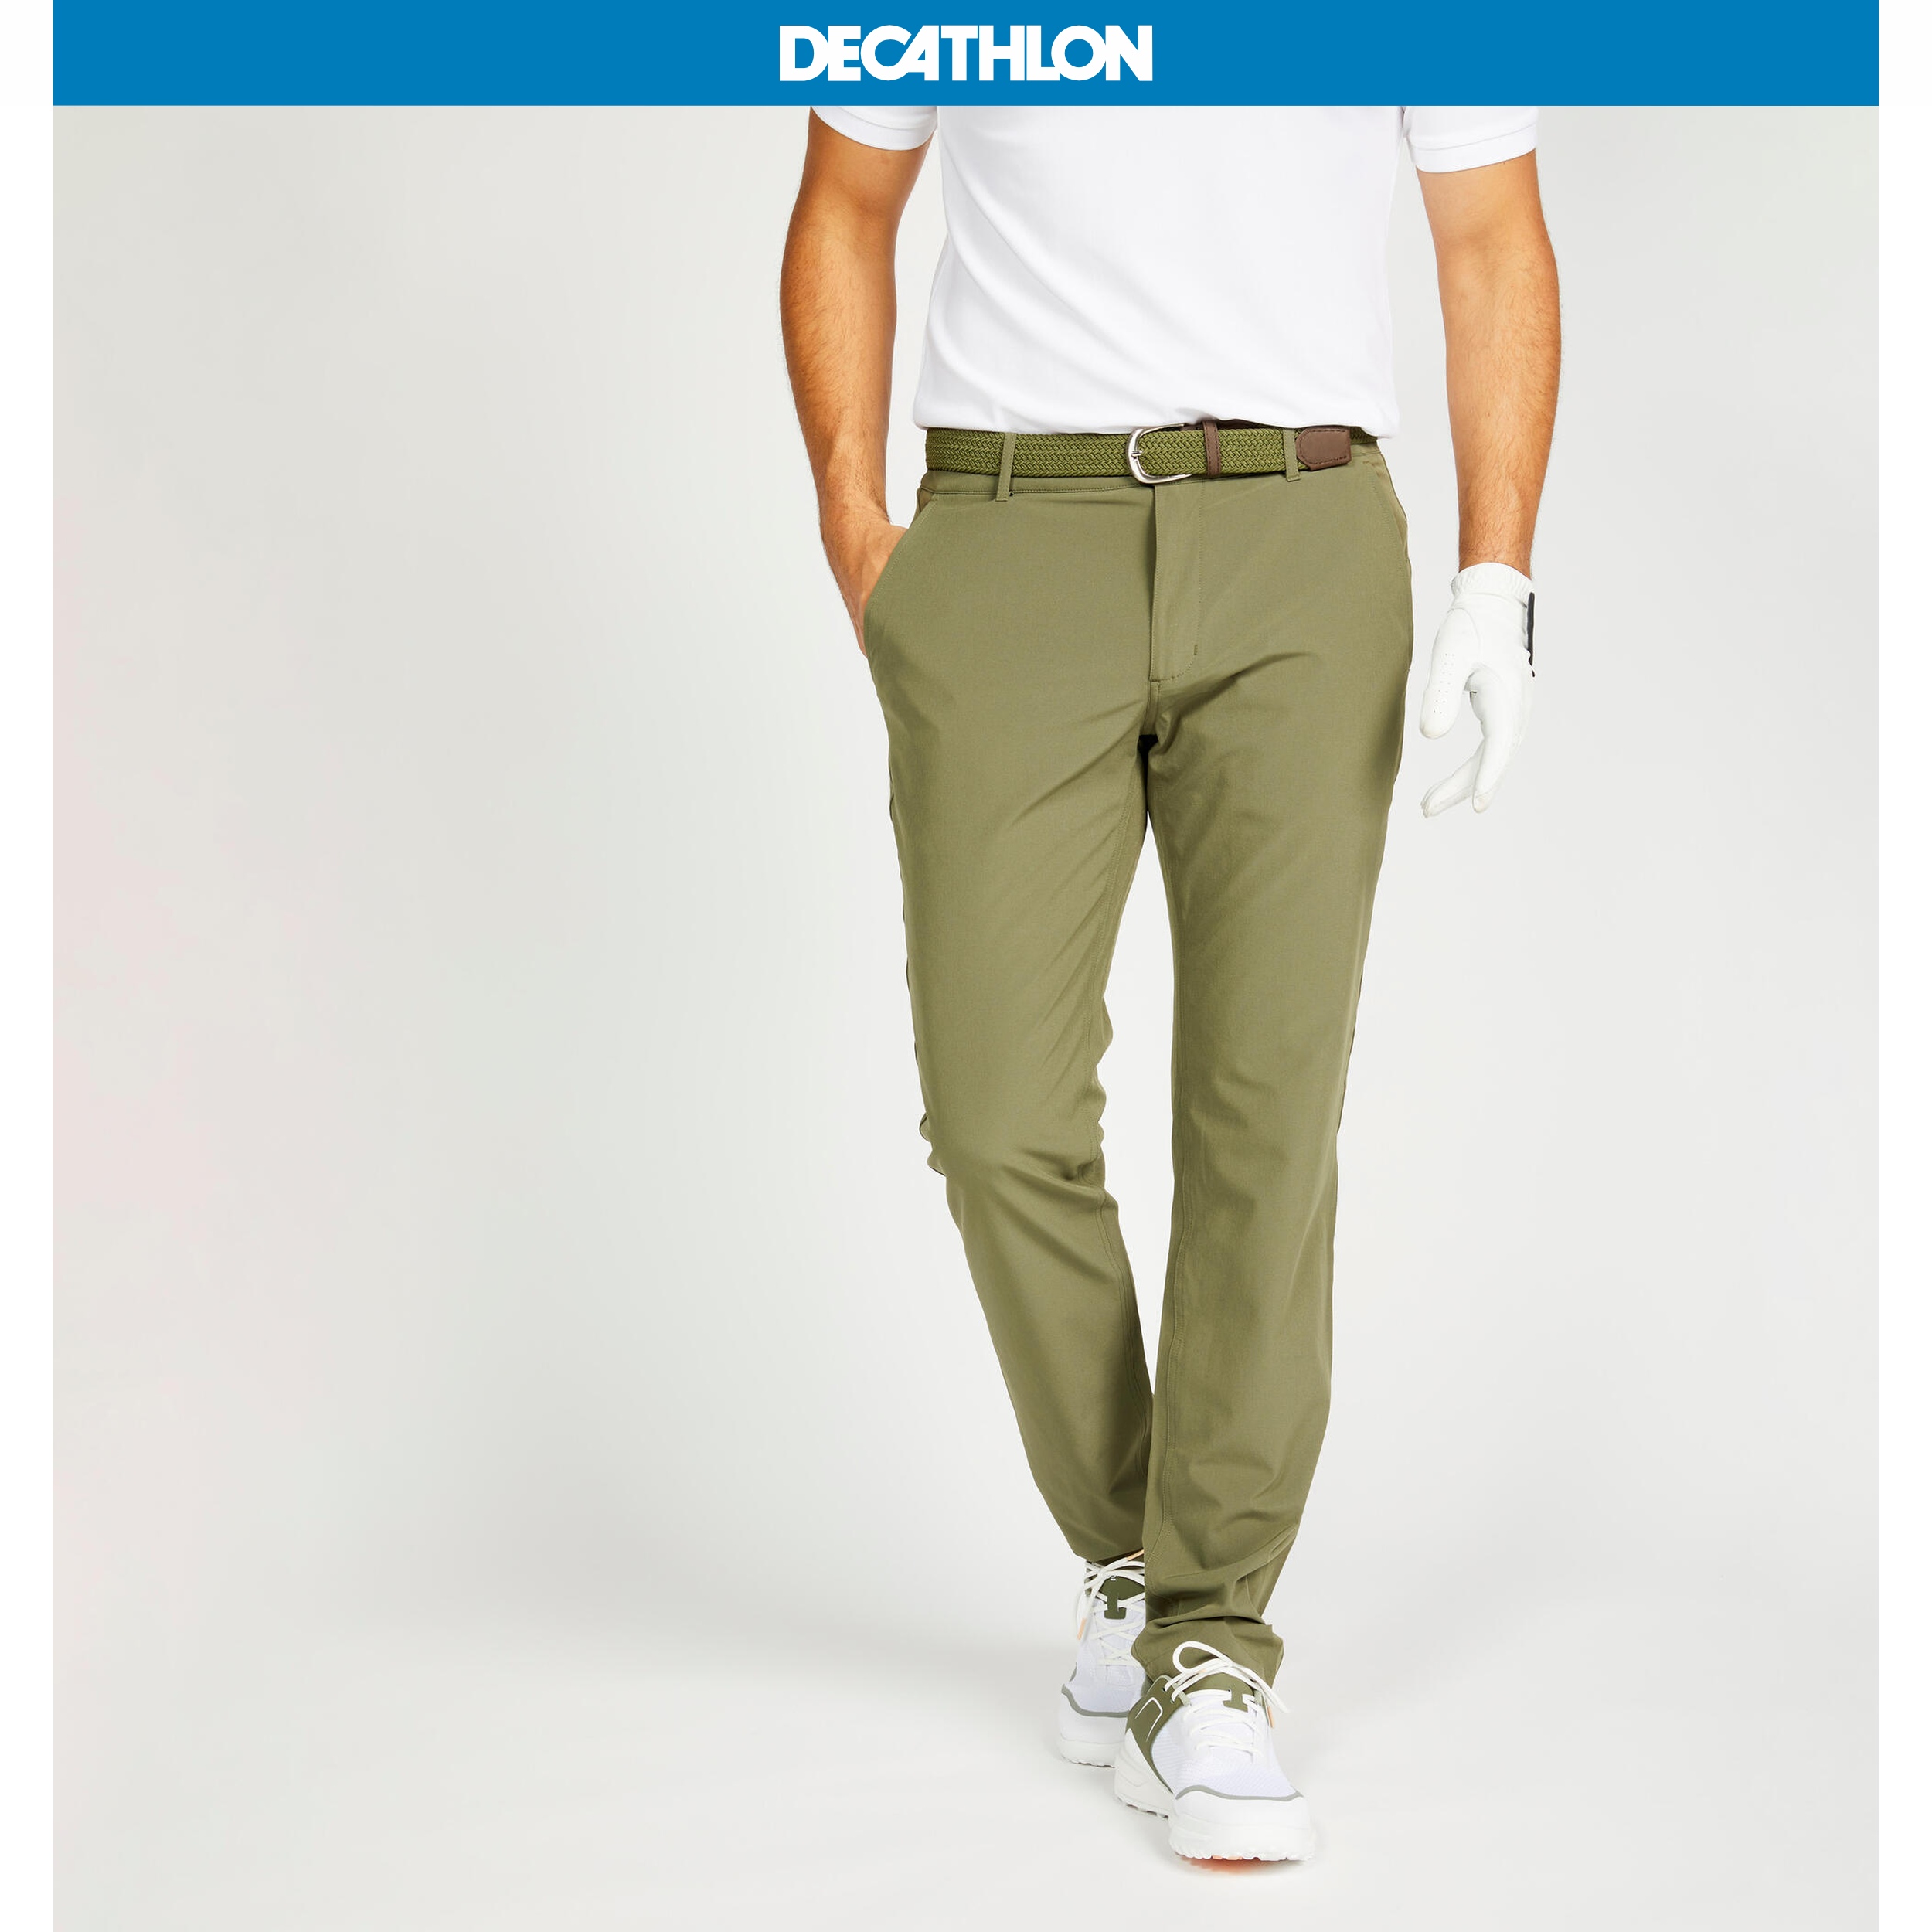 Decathlon Sports India - Malad - Get your golf starter kit starting at only  ₹499! Tap here to purchase: Golf shoes- https://bit.ly/3fEMfHp Golf polo  t-shirt- https://bit.ly/3rpGgZP Golf trousers- https://bit.ly/3UWDg4J Golf  Club- https://bit.ly/3fFBLb7